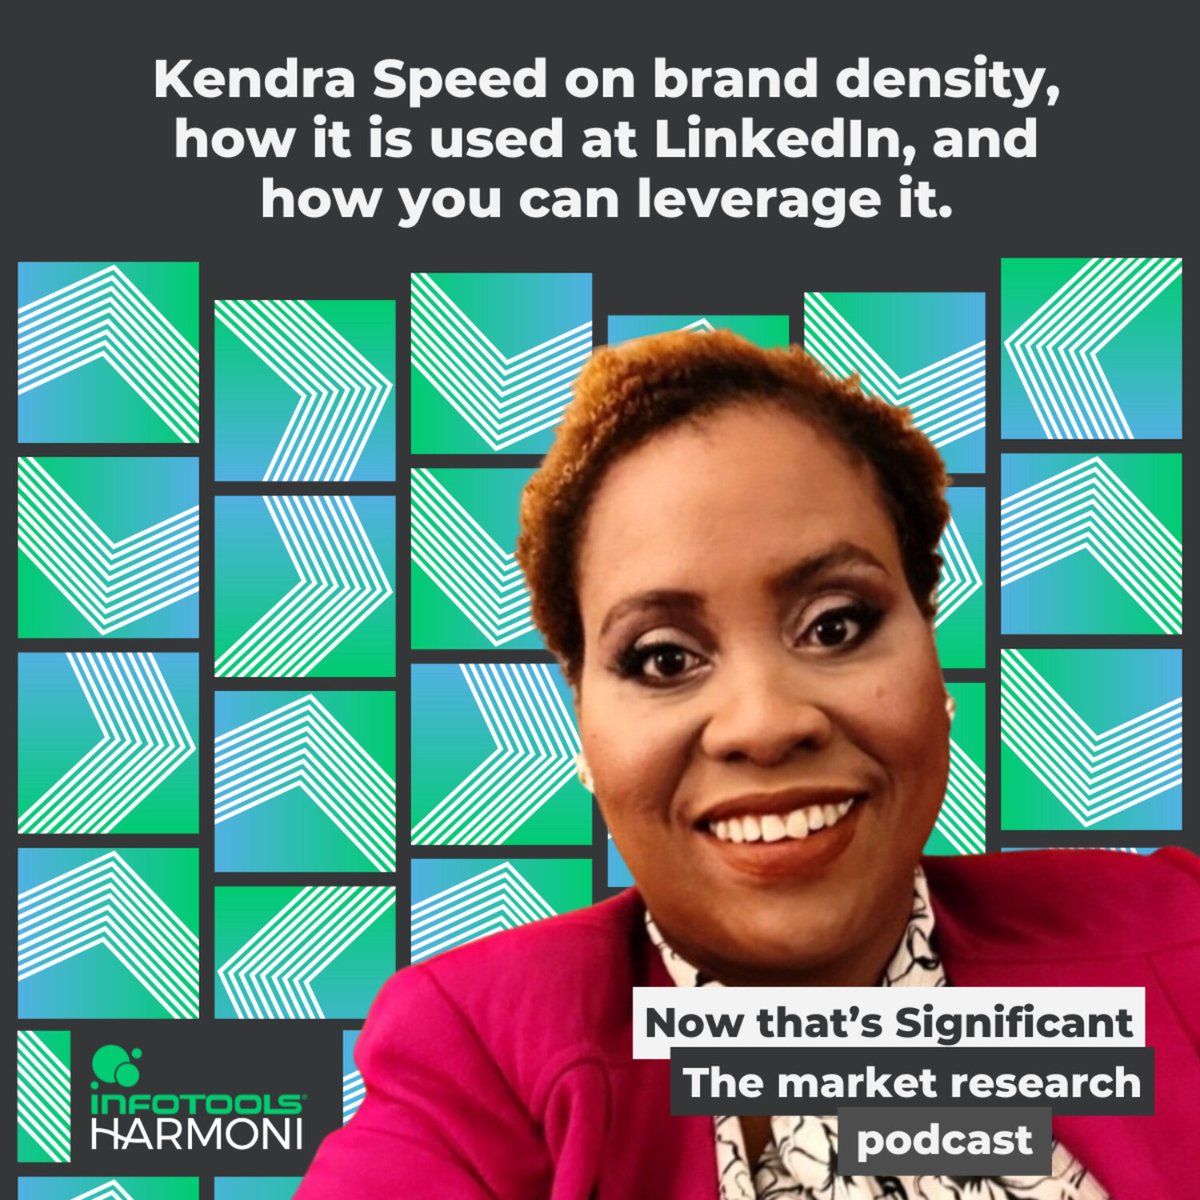 What is brand density and how can you leverage it? Kendra Speed of LinkedIn shares more about how the 'strength of connectedness' leads to a higher market share. Listen here: hubs.li/Q02pQslG0 #branding #brandbuilding #brandstrategy #insights #mrx #marketresearch